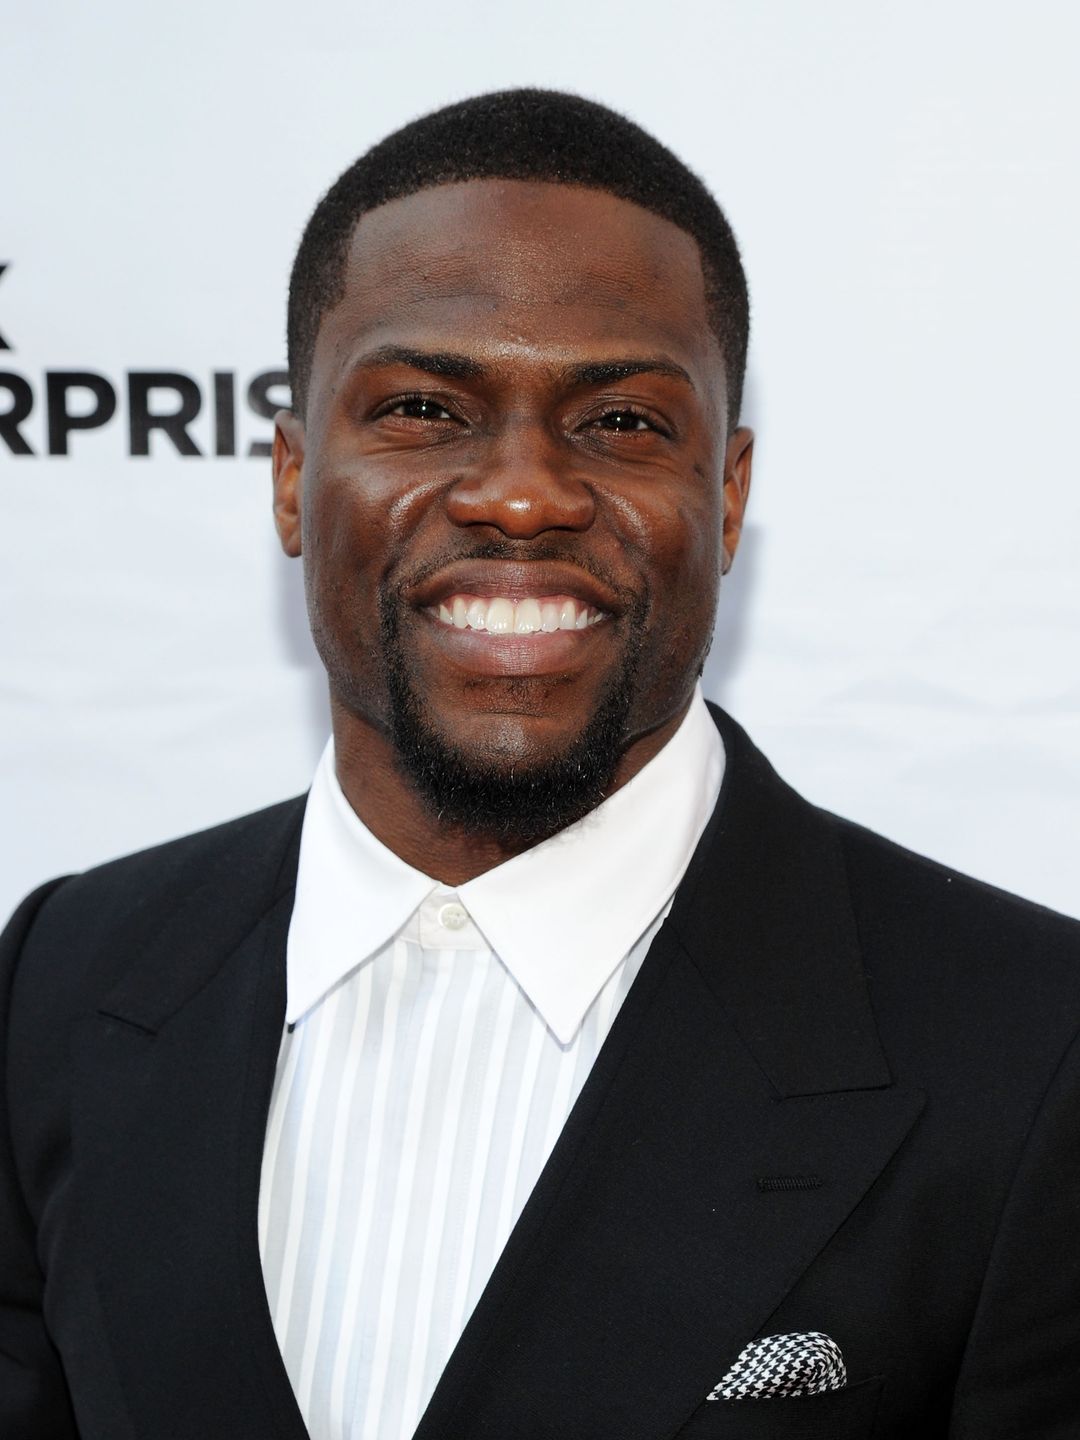 Kevin Hart appearance